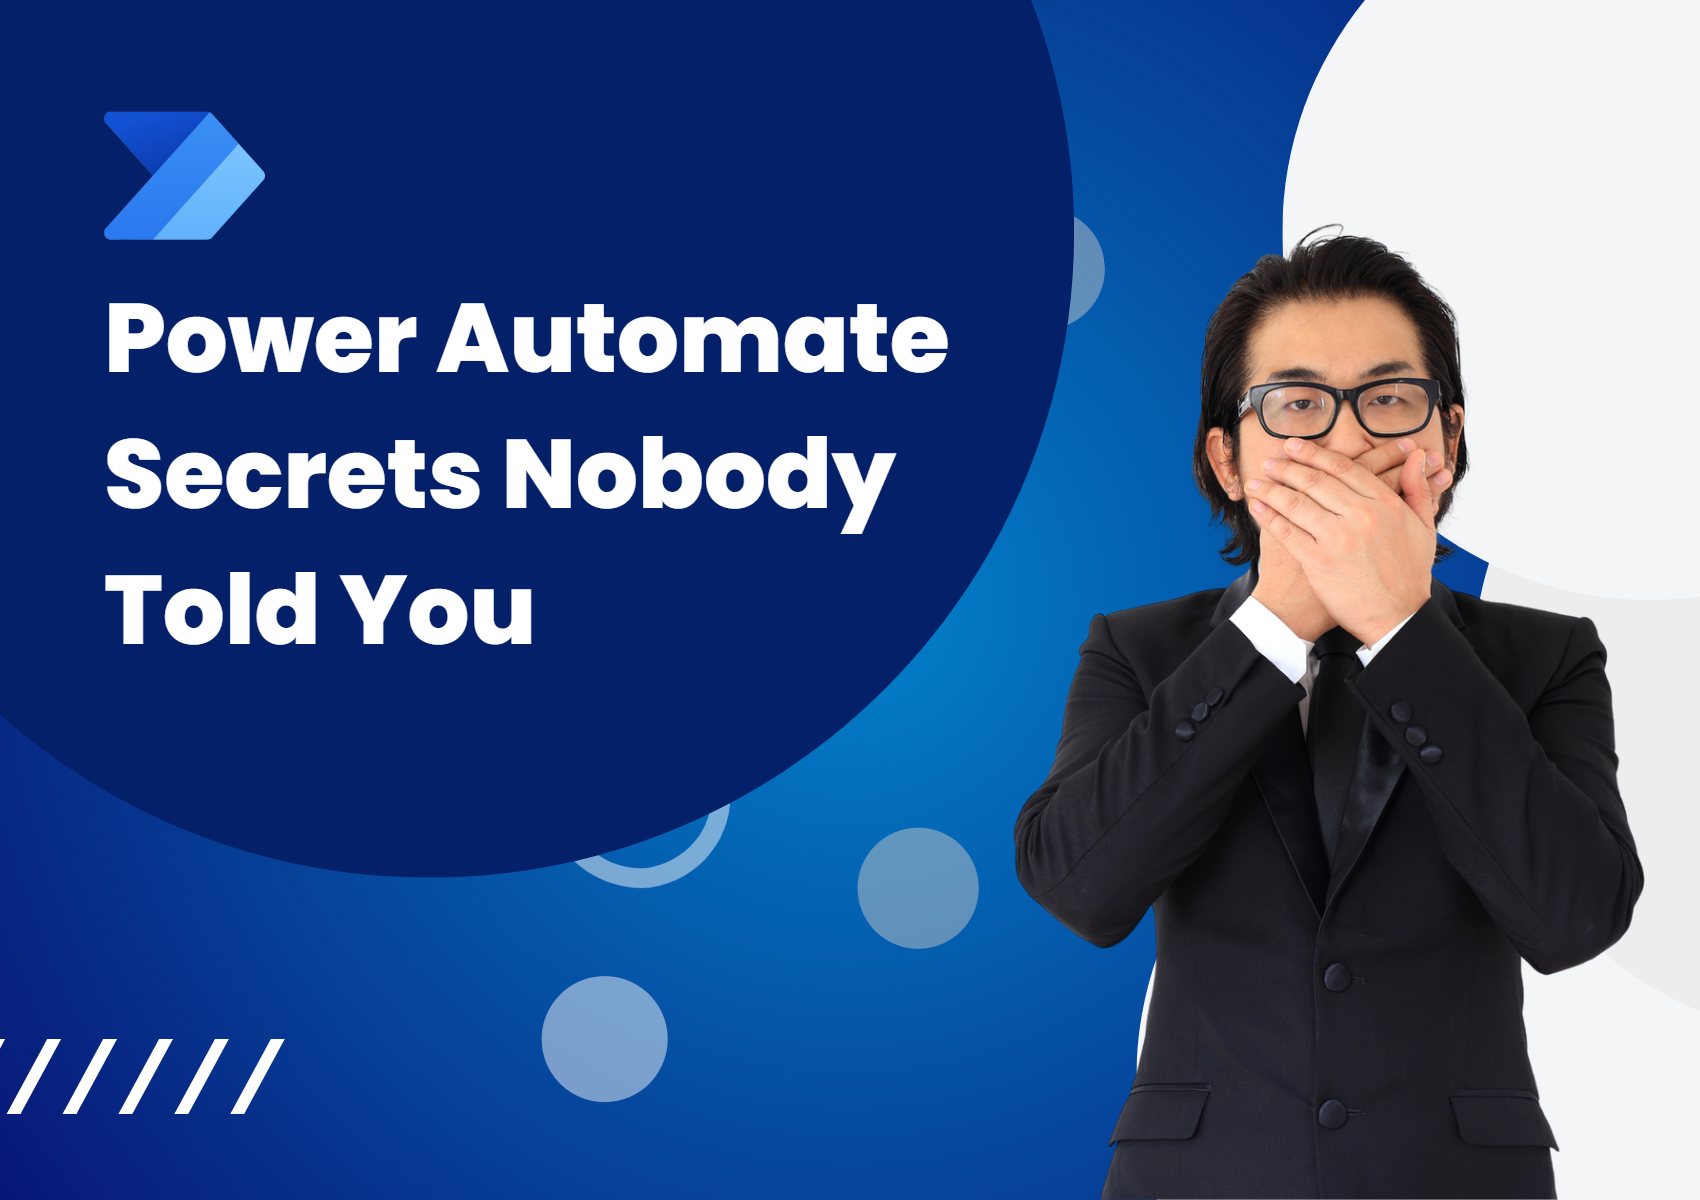 Power Automate Secrets Nobody Told You